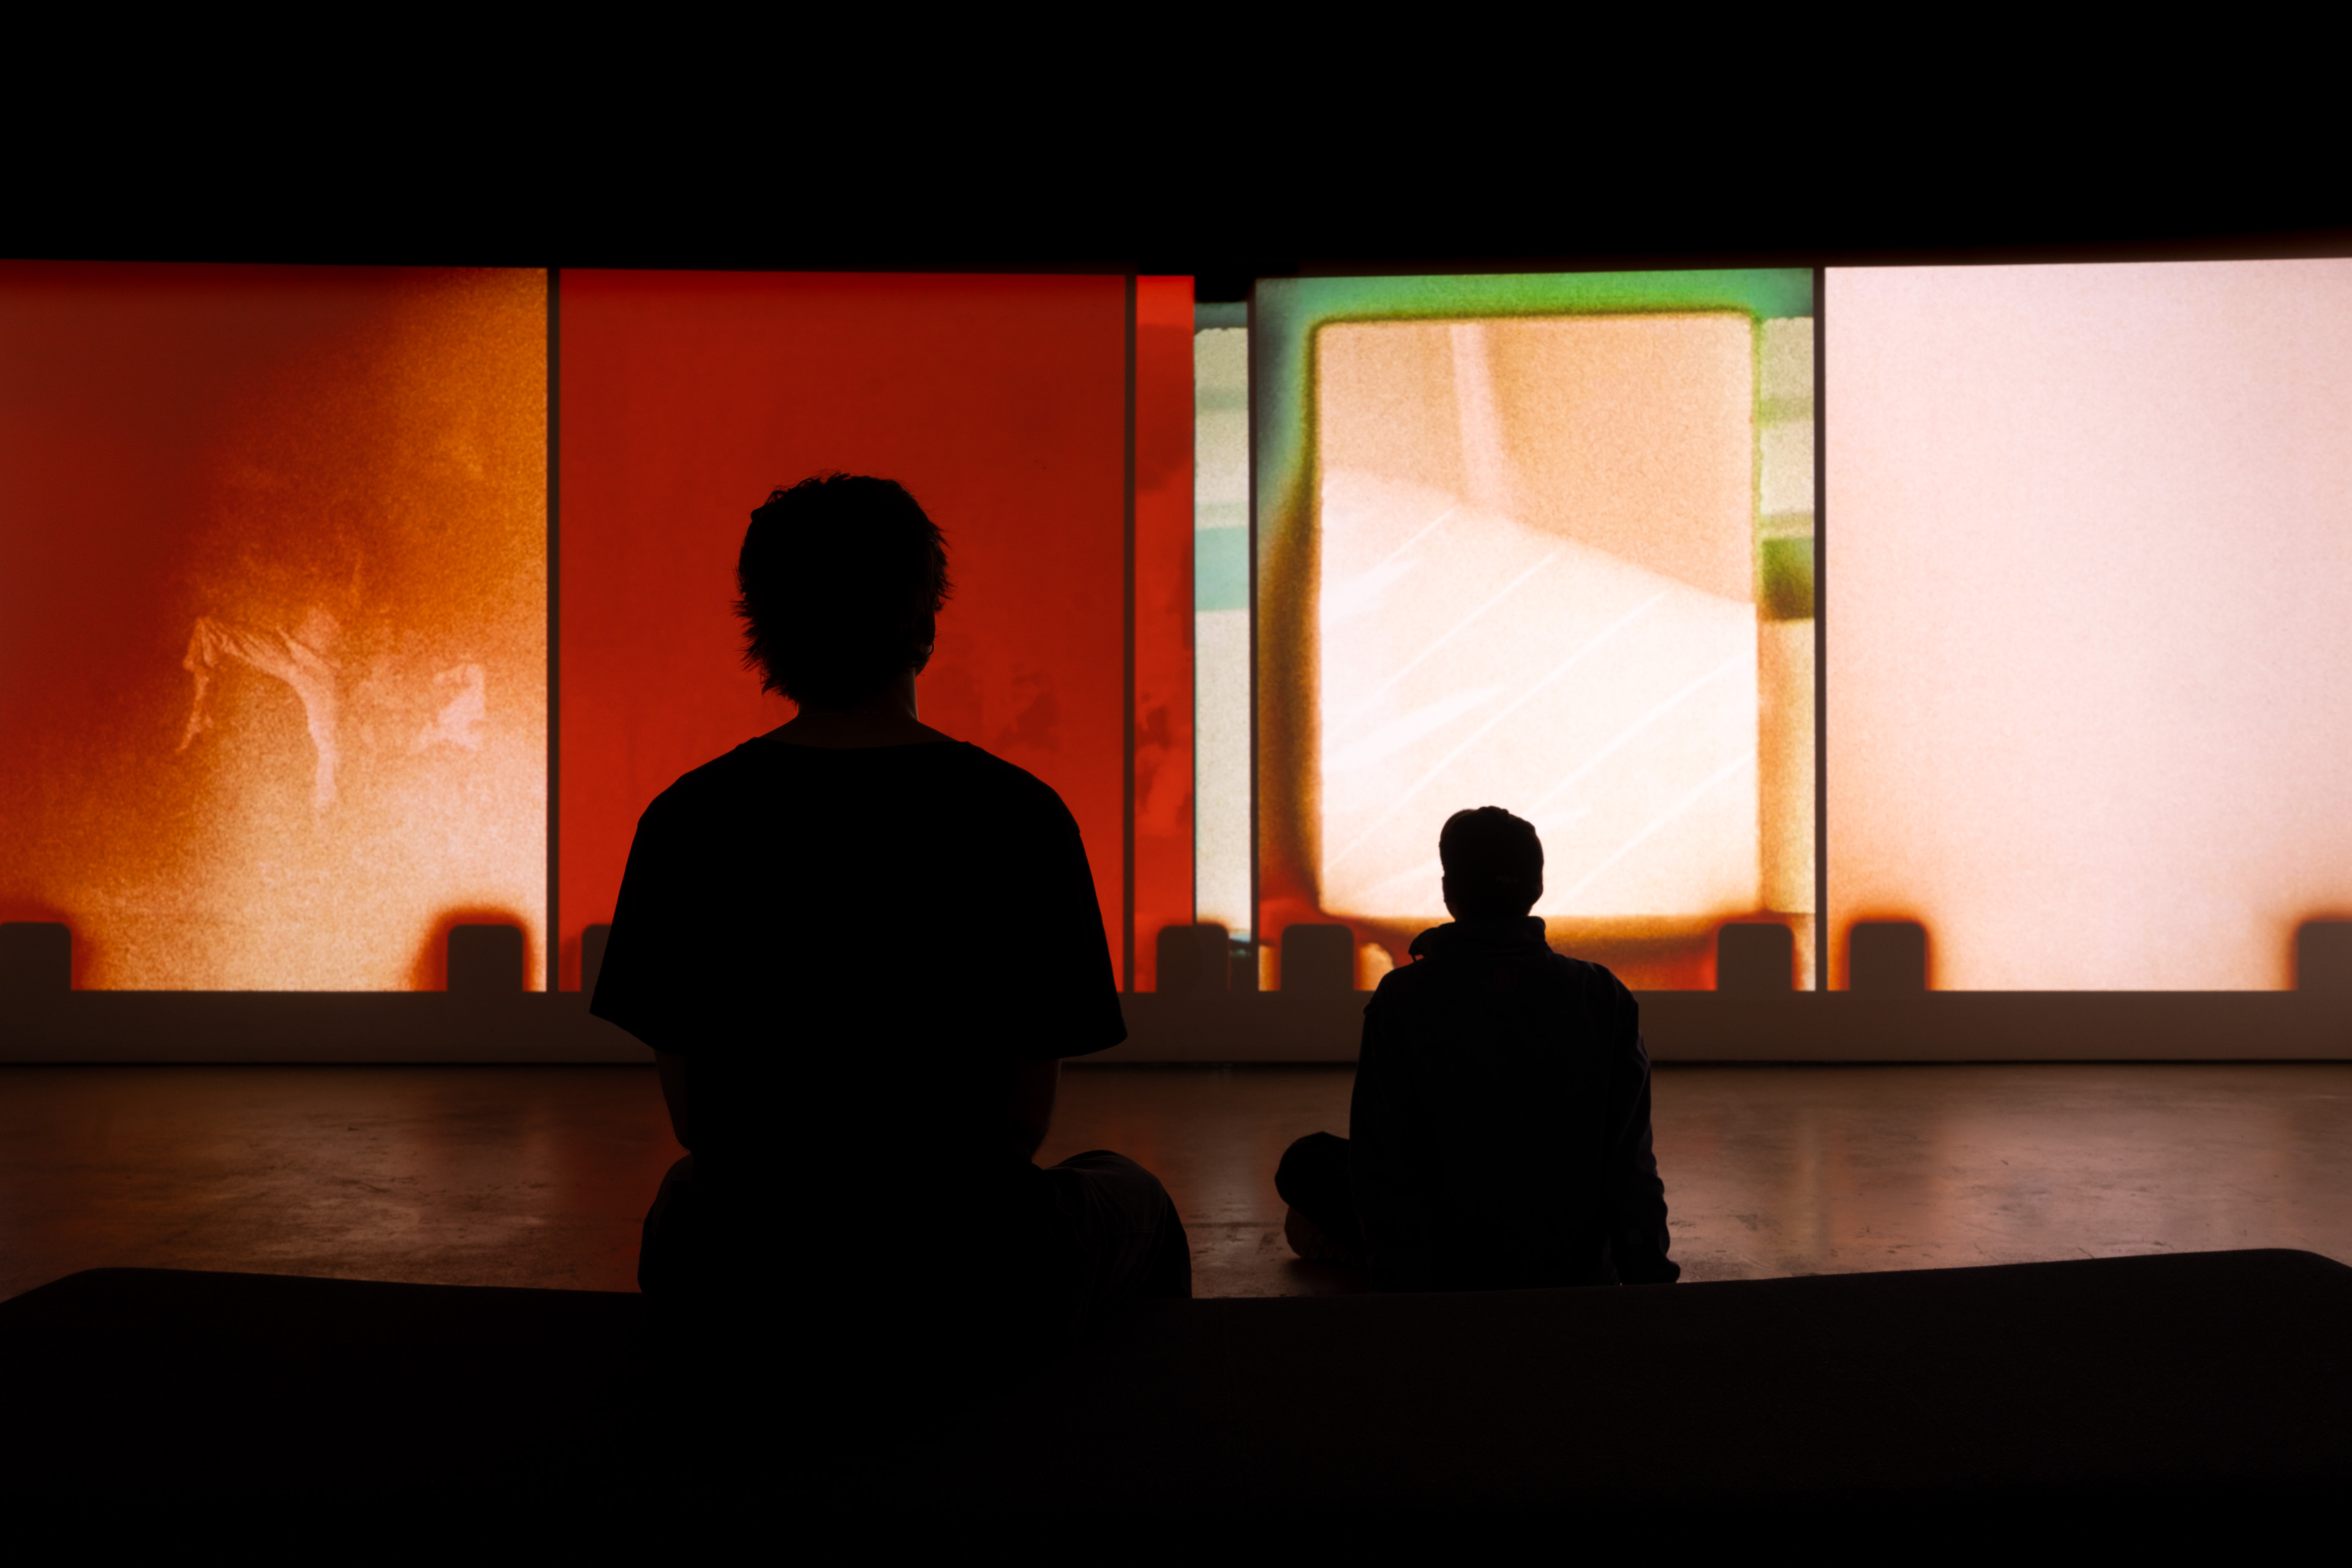 Two figures watching a colourful film projection installation